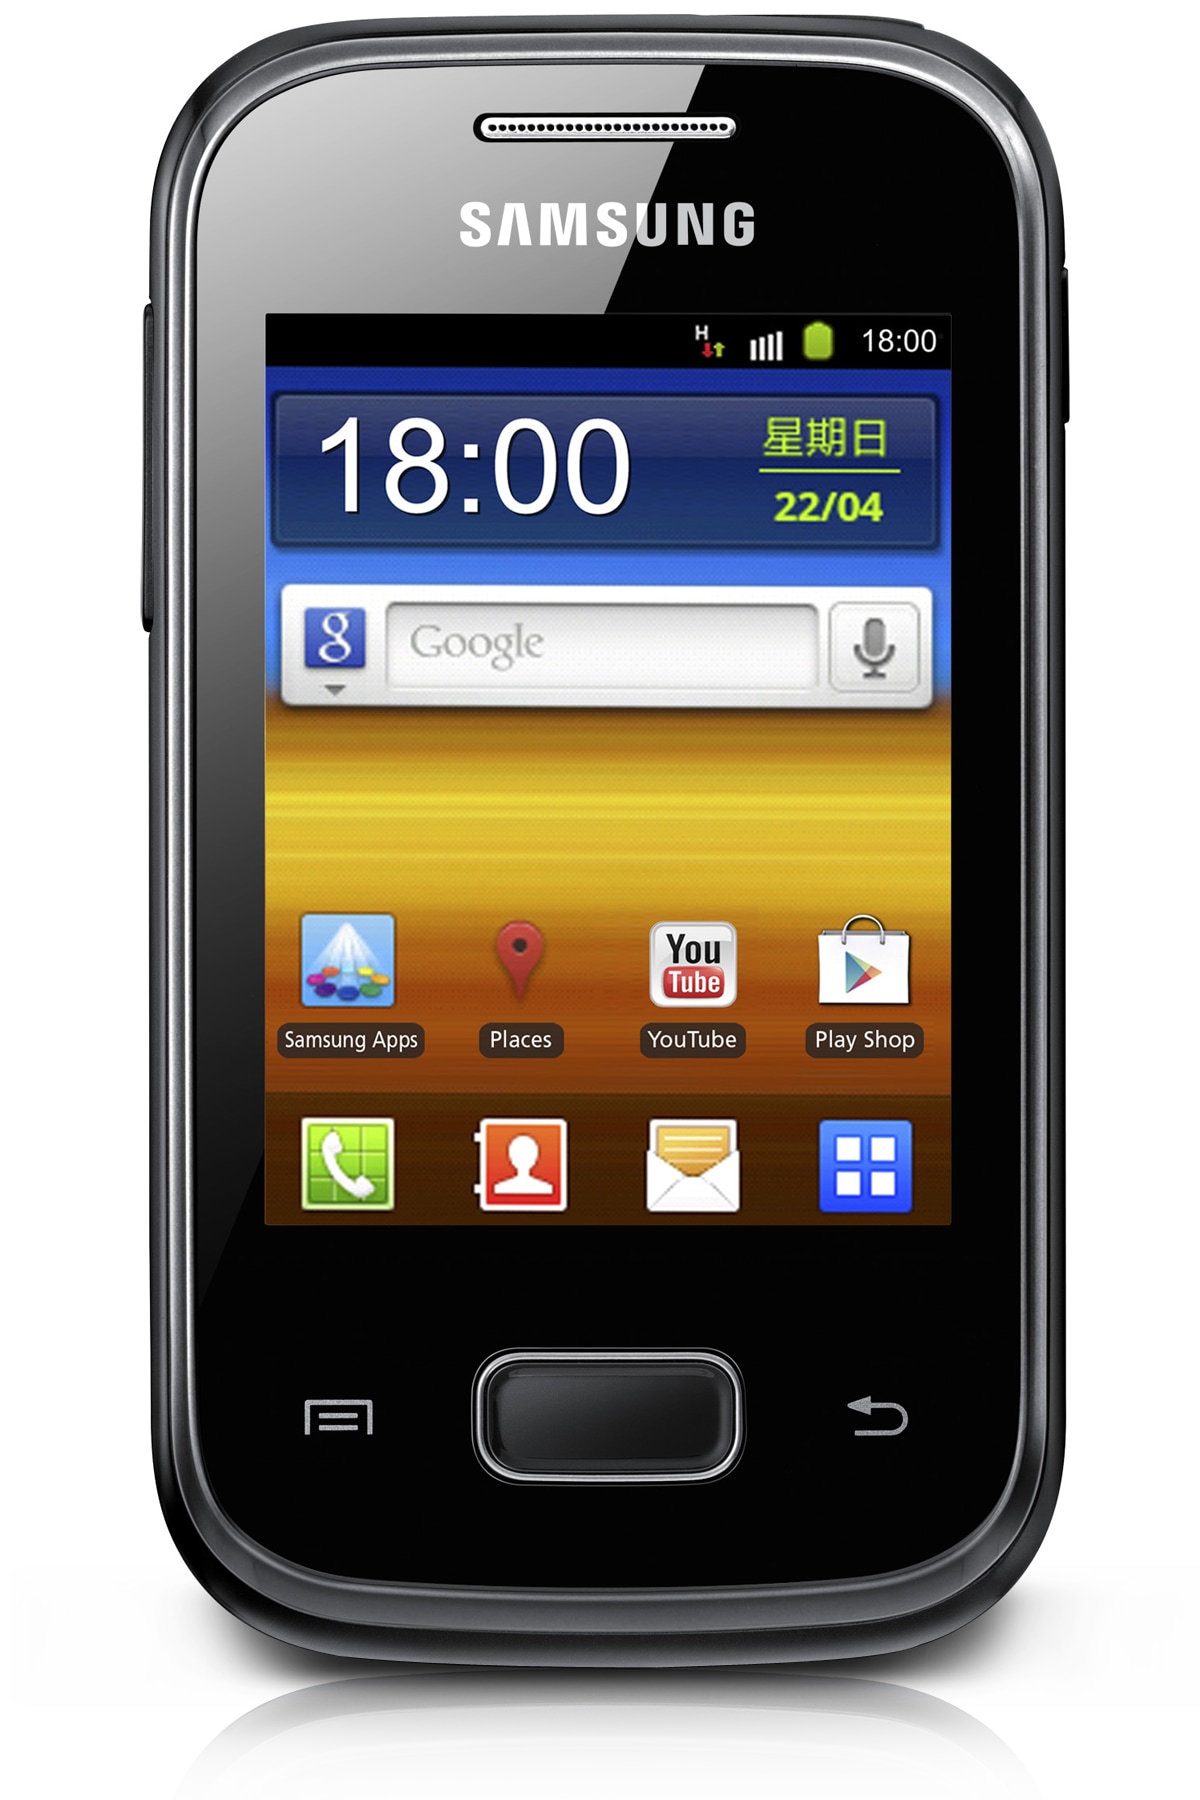 Compare Samsung Galaxy Pocket S5300 With Similar Mobile Phones